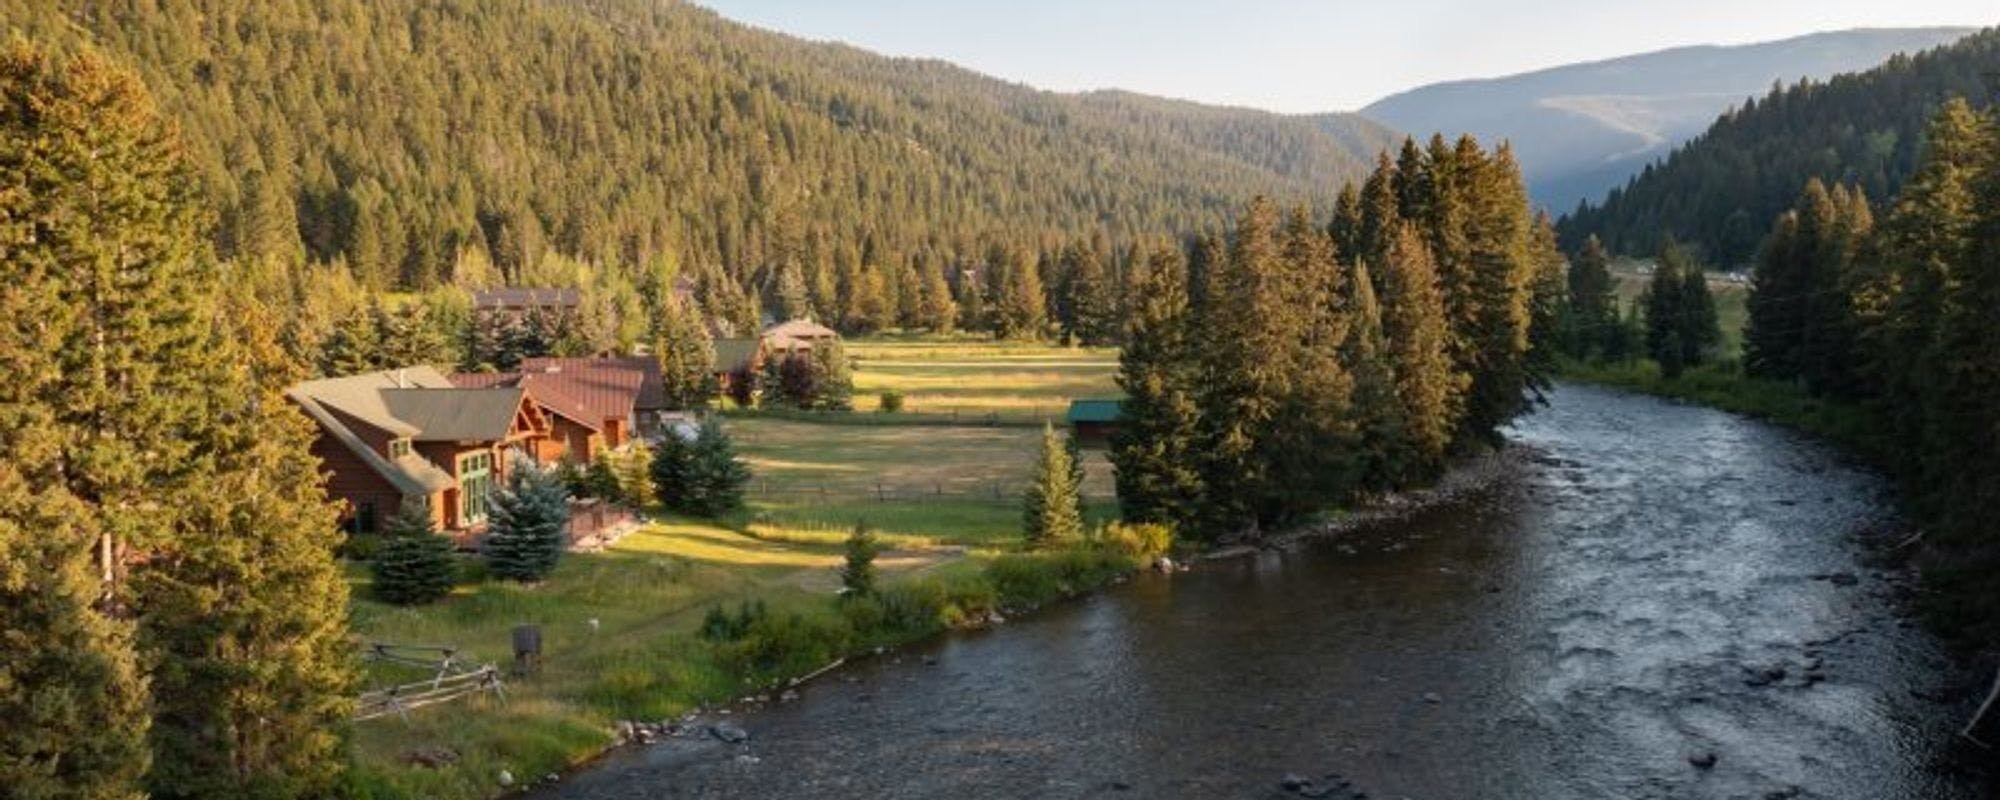 Scenic river view by Big Sky vacation rental home